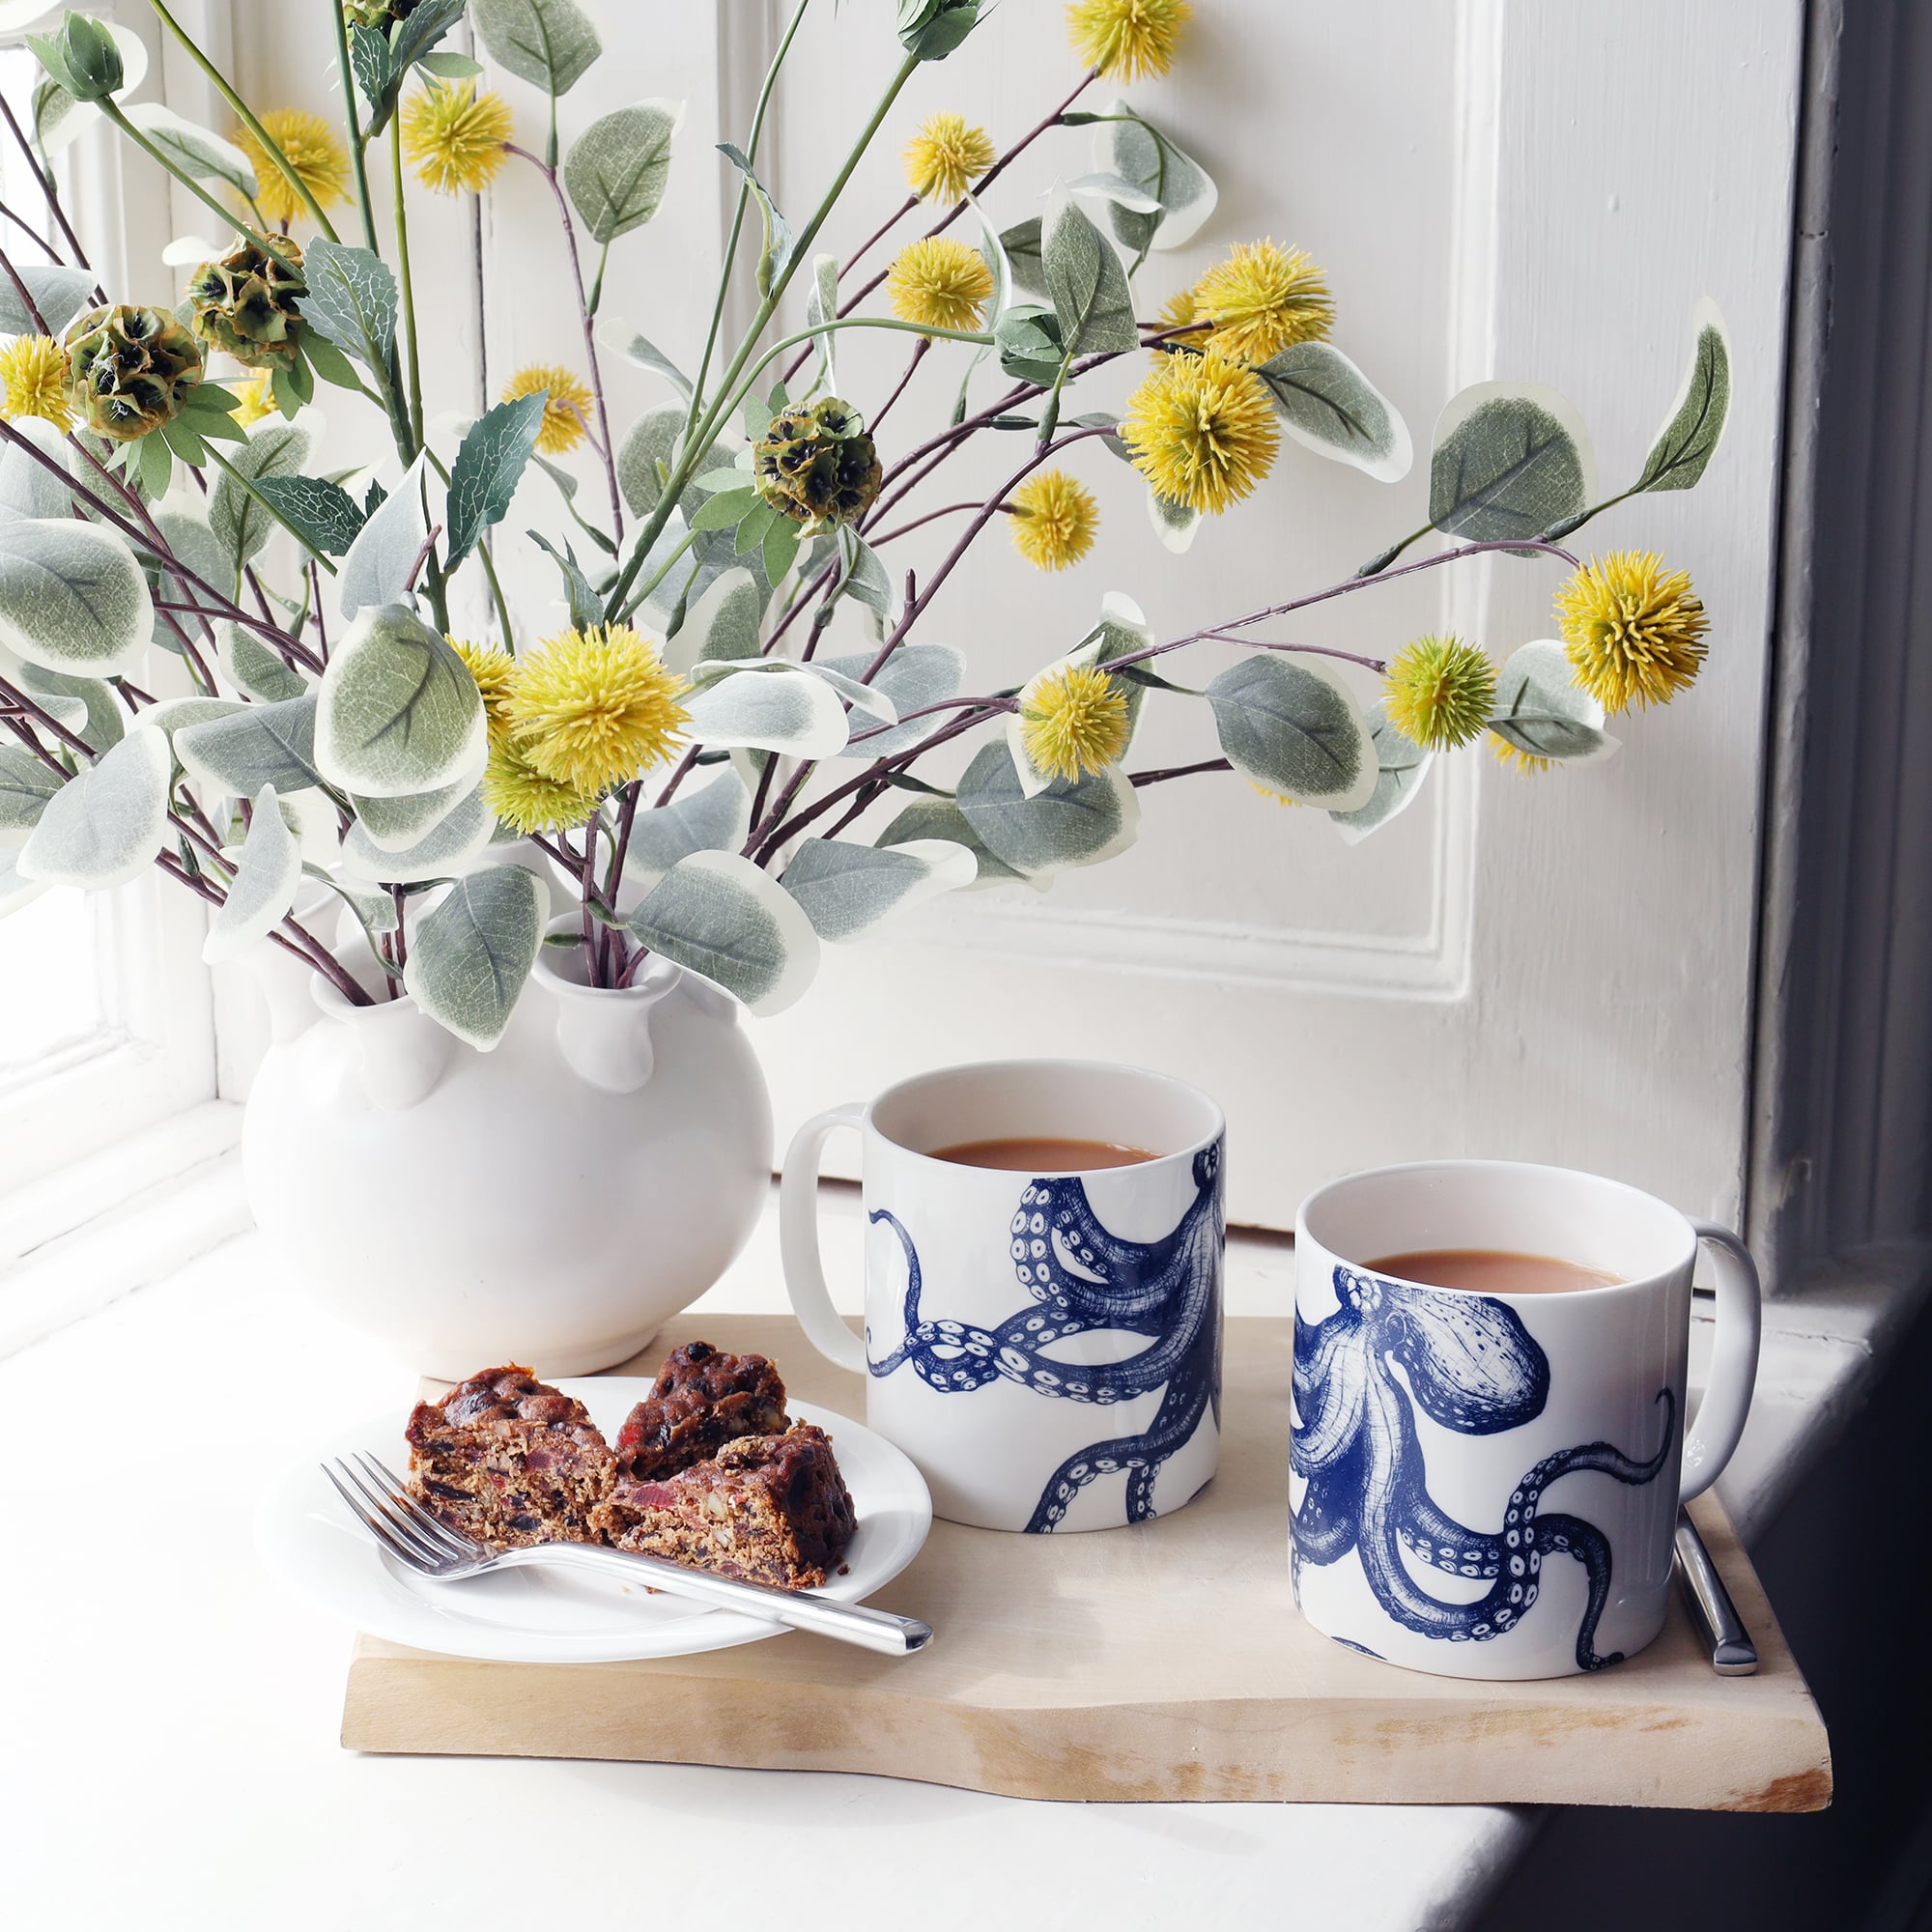 2 white bone china mugs each with a navy illustrated octopus on. They are sitting by a window on a wooden board with a vase of yellow pom pom of flowers in the background and slices of fruit cake to the side.